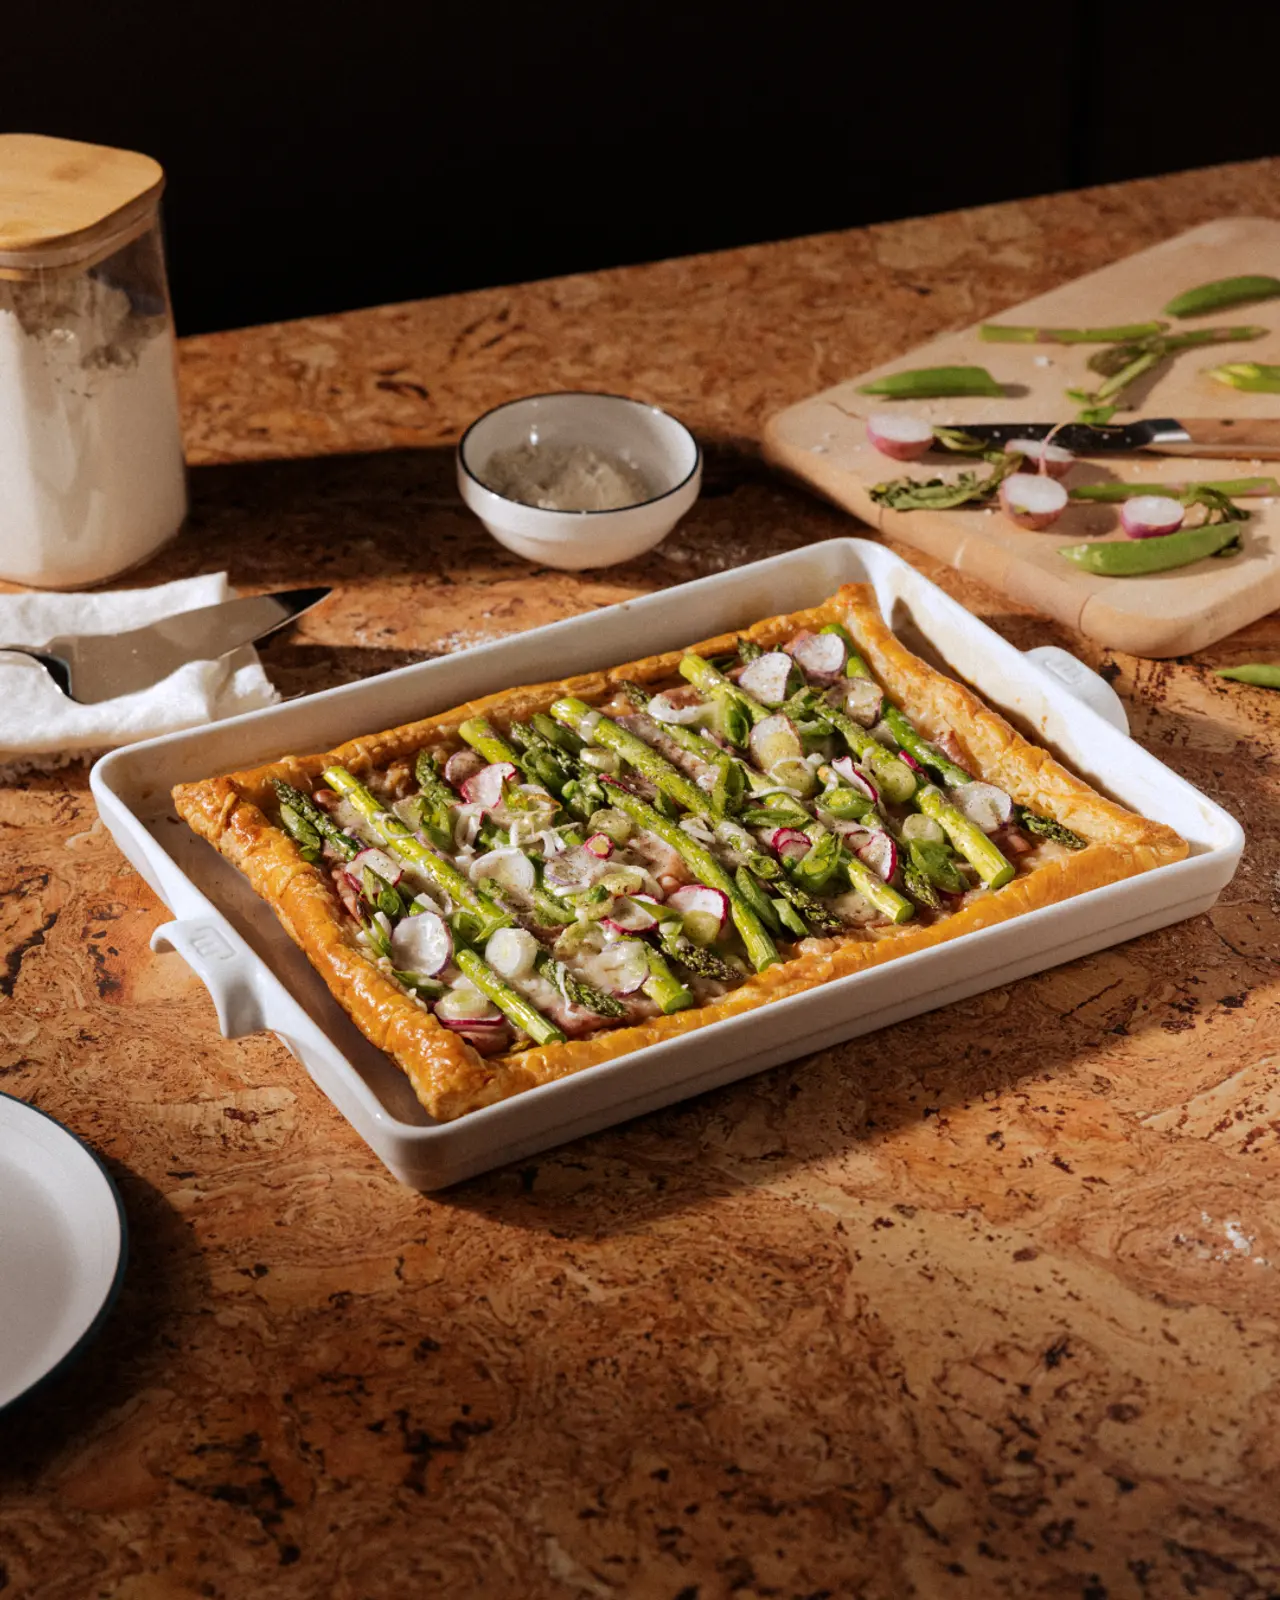 A freshly baked asparagus and cheese tart in a white dish is displayed on a countertop beside ingredients and a wooden cutting board.